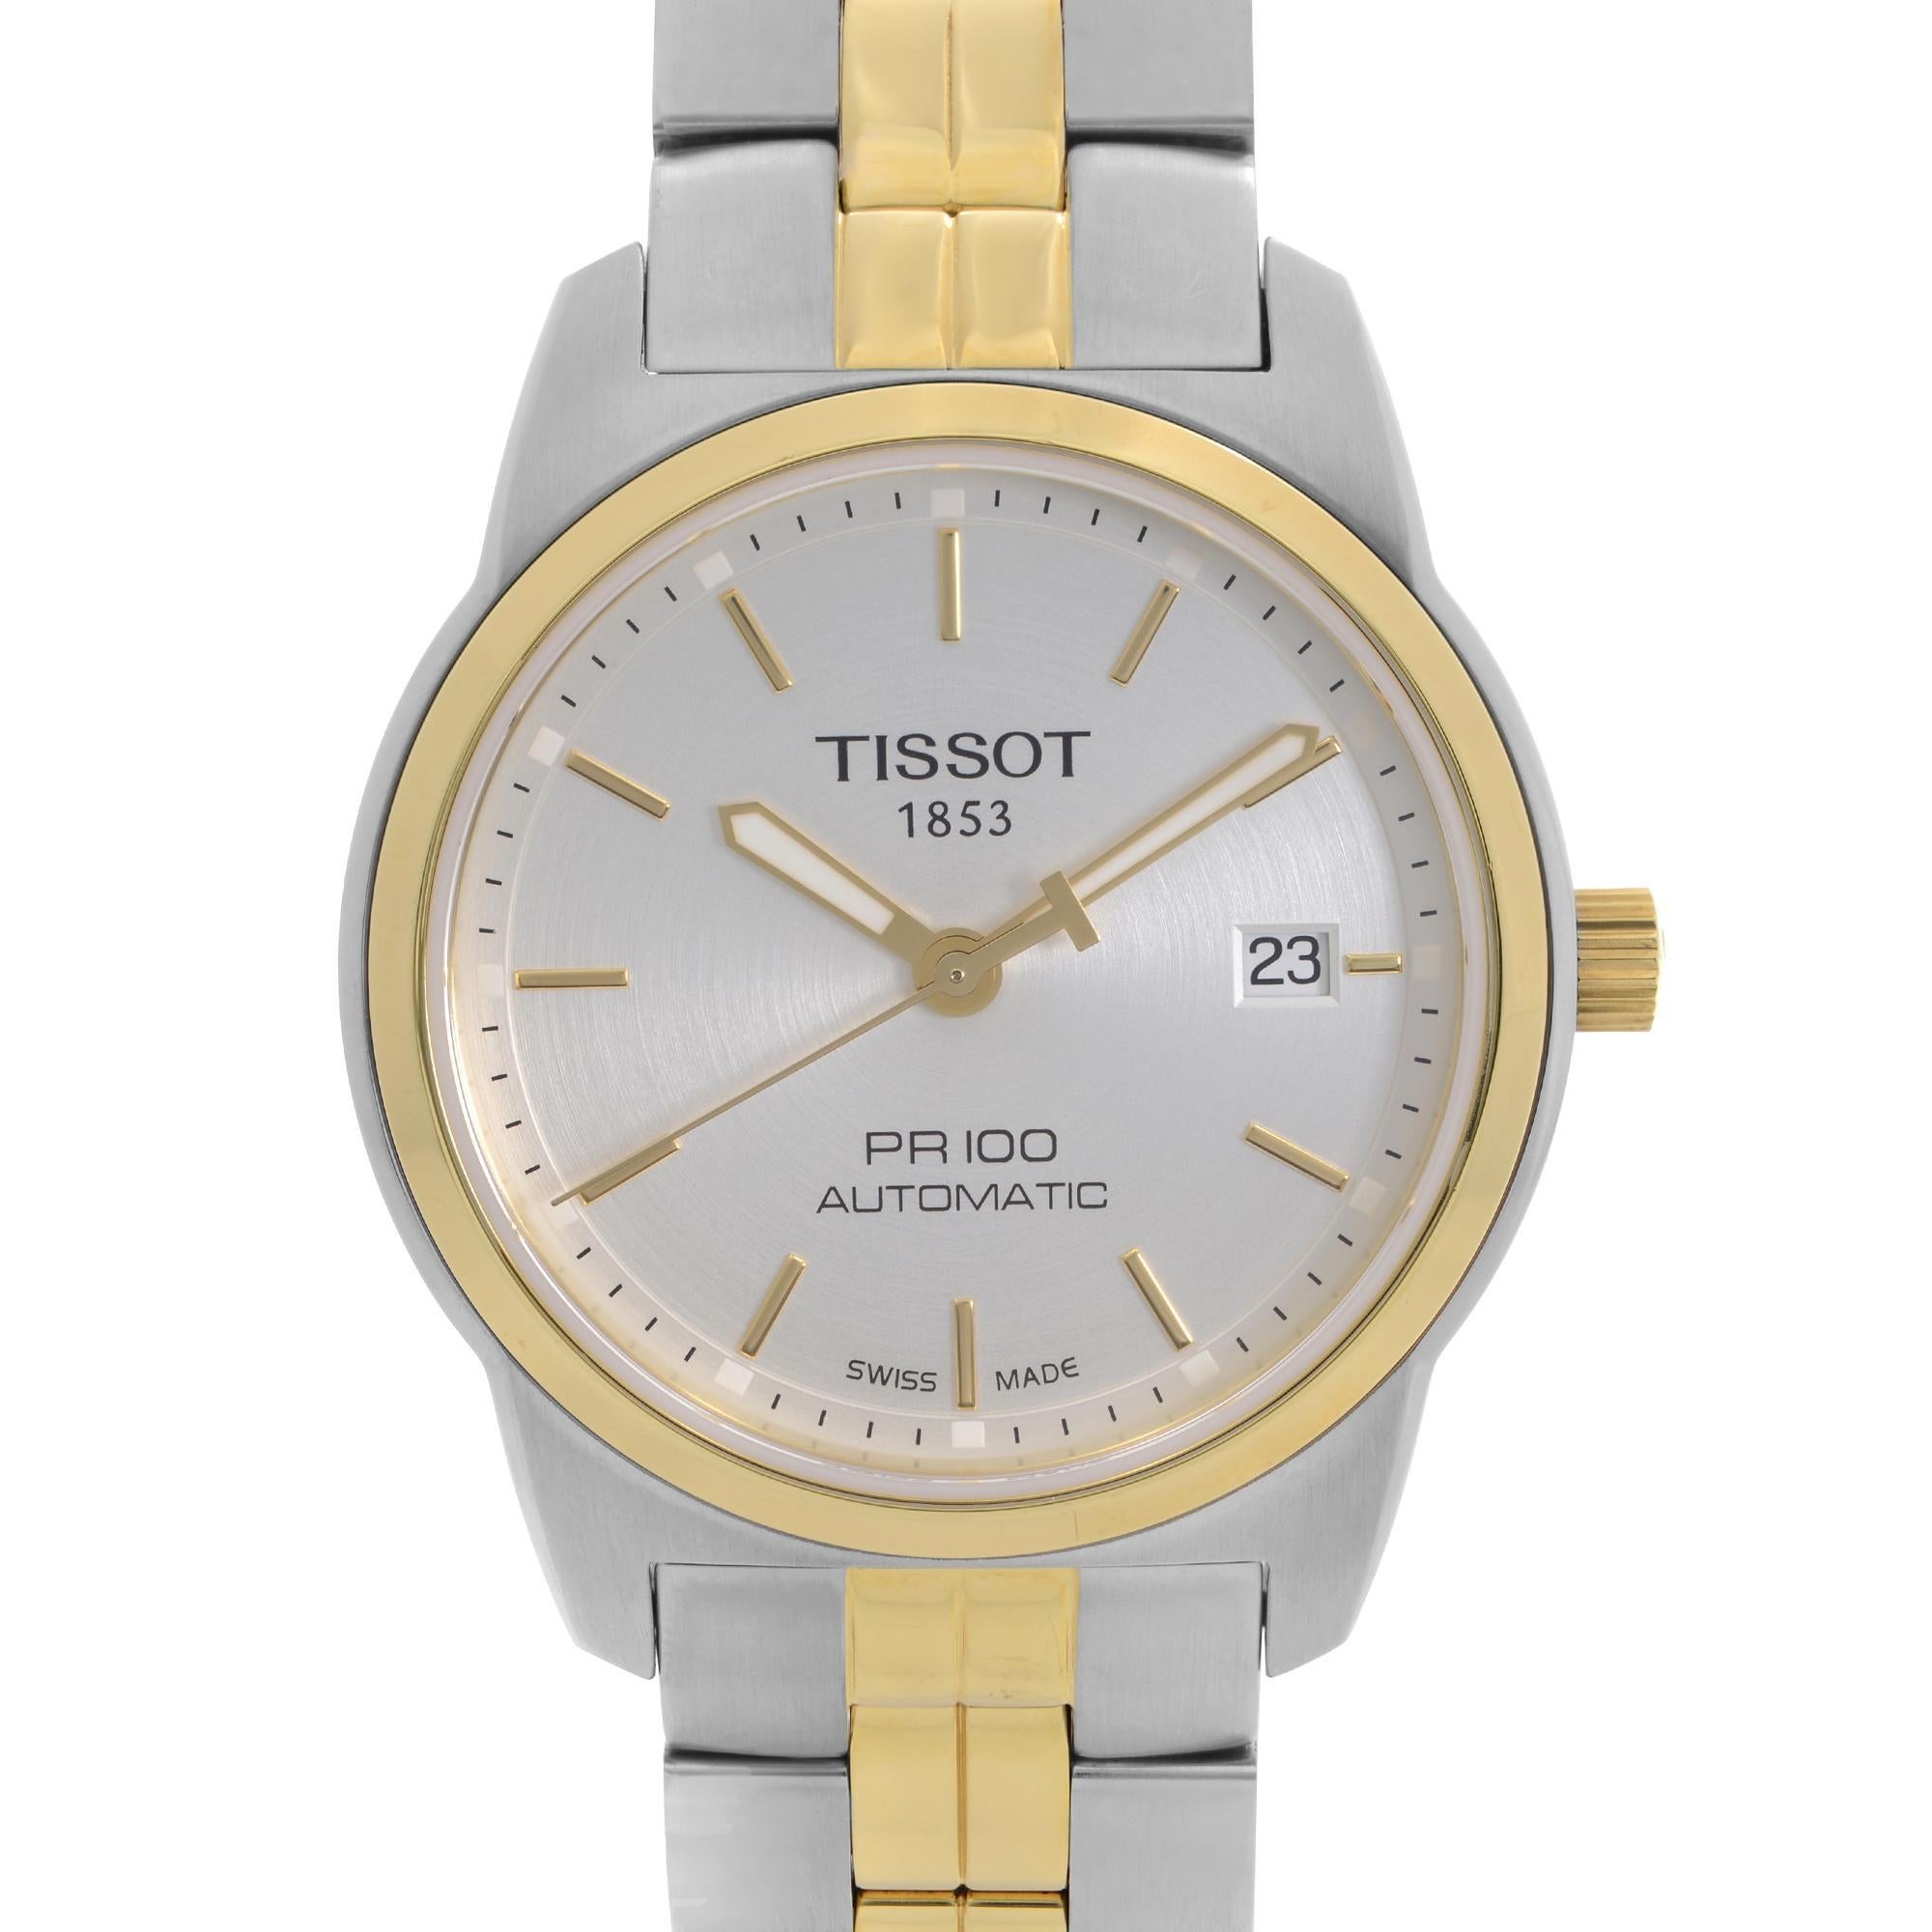 Display Model Tissot PR 100 Automatic Two-Tone Steel Silver Dial Mens Watch T049.407.22.031.00. The watch has a couple of insignificant blemishes on gold tone surfaces. This Timepiece is Powered by Mechanical (Automatic) Movement with Features: